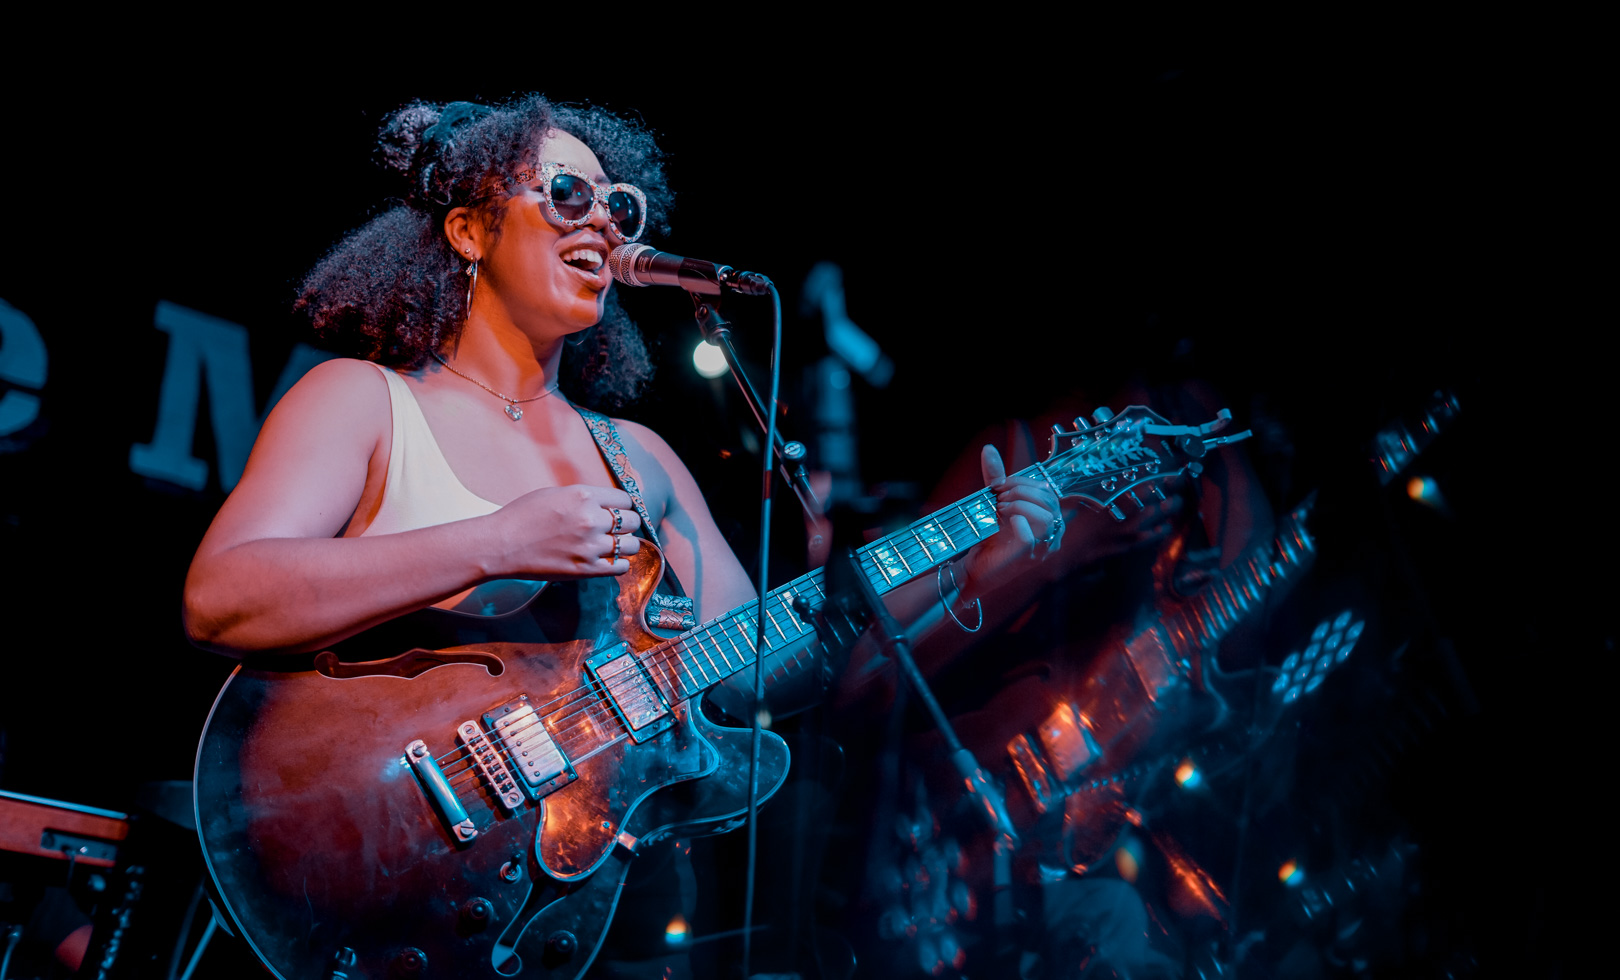 A woman sings and plays guitar on stage wearing sunglasses